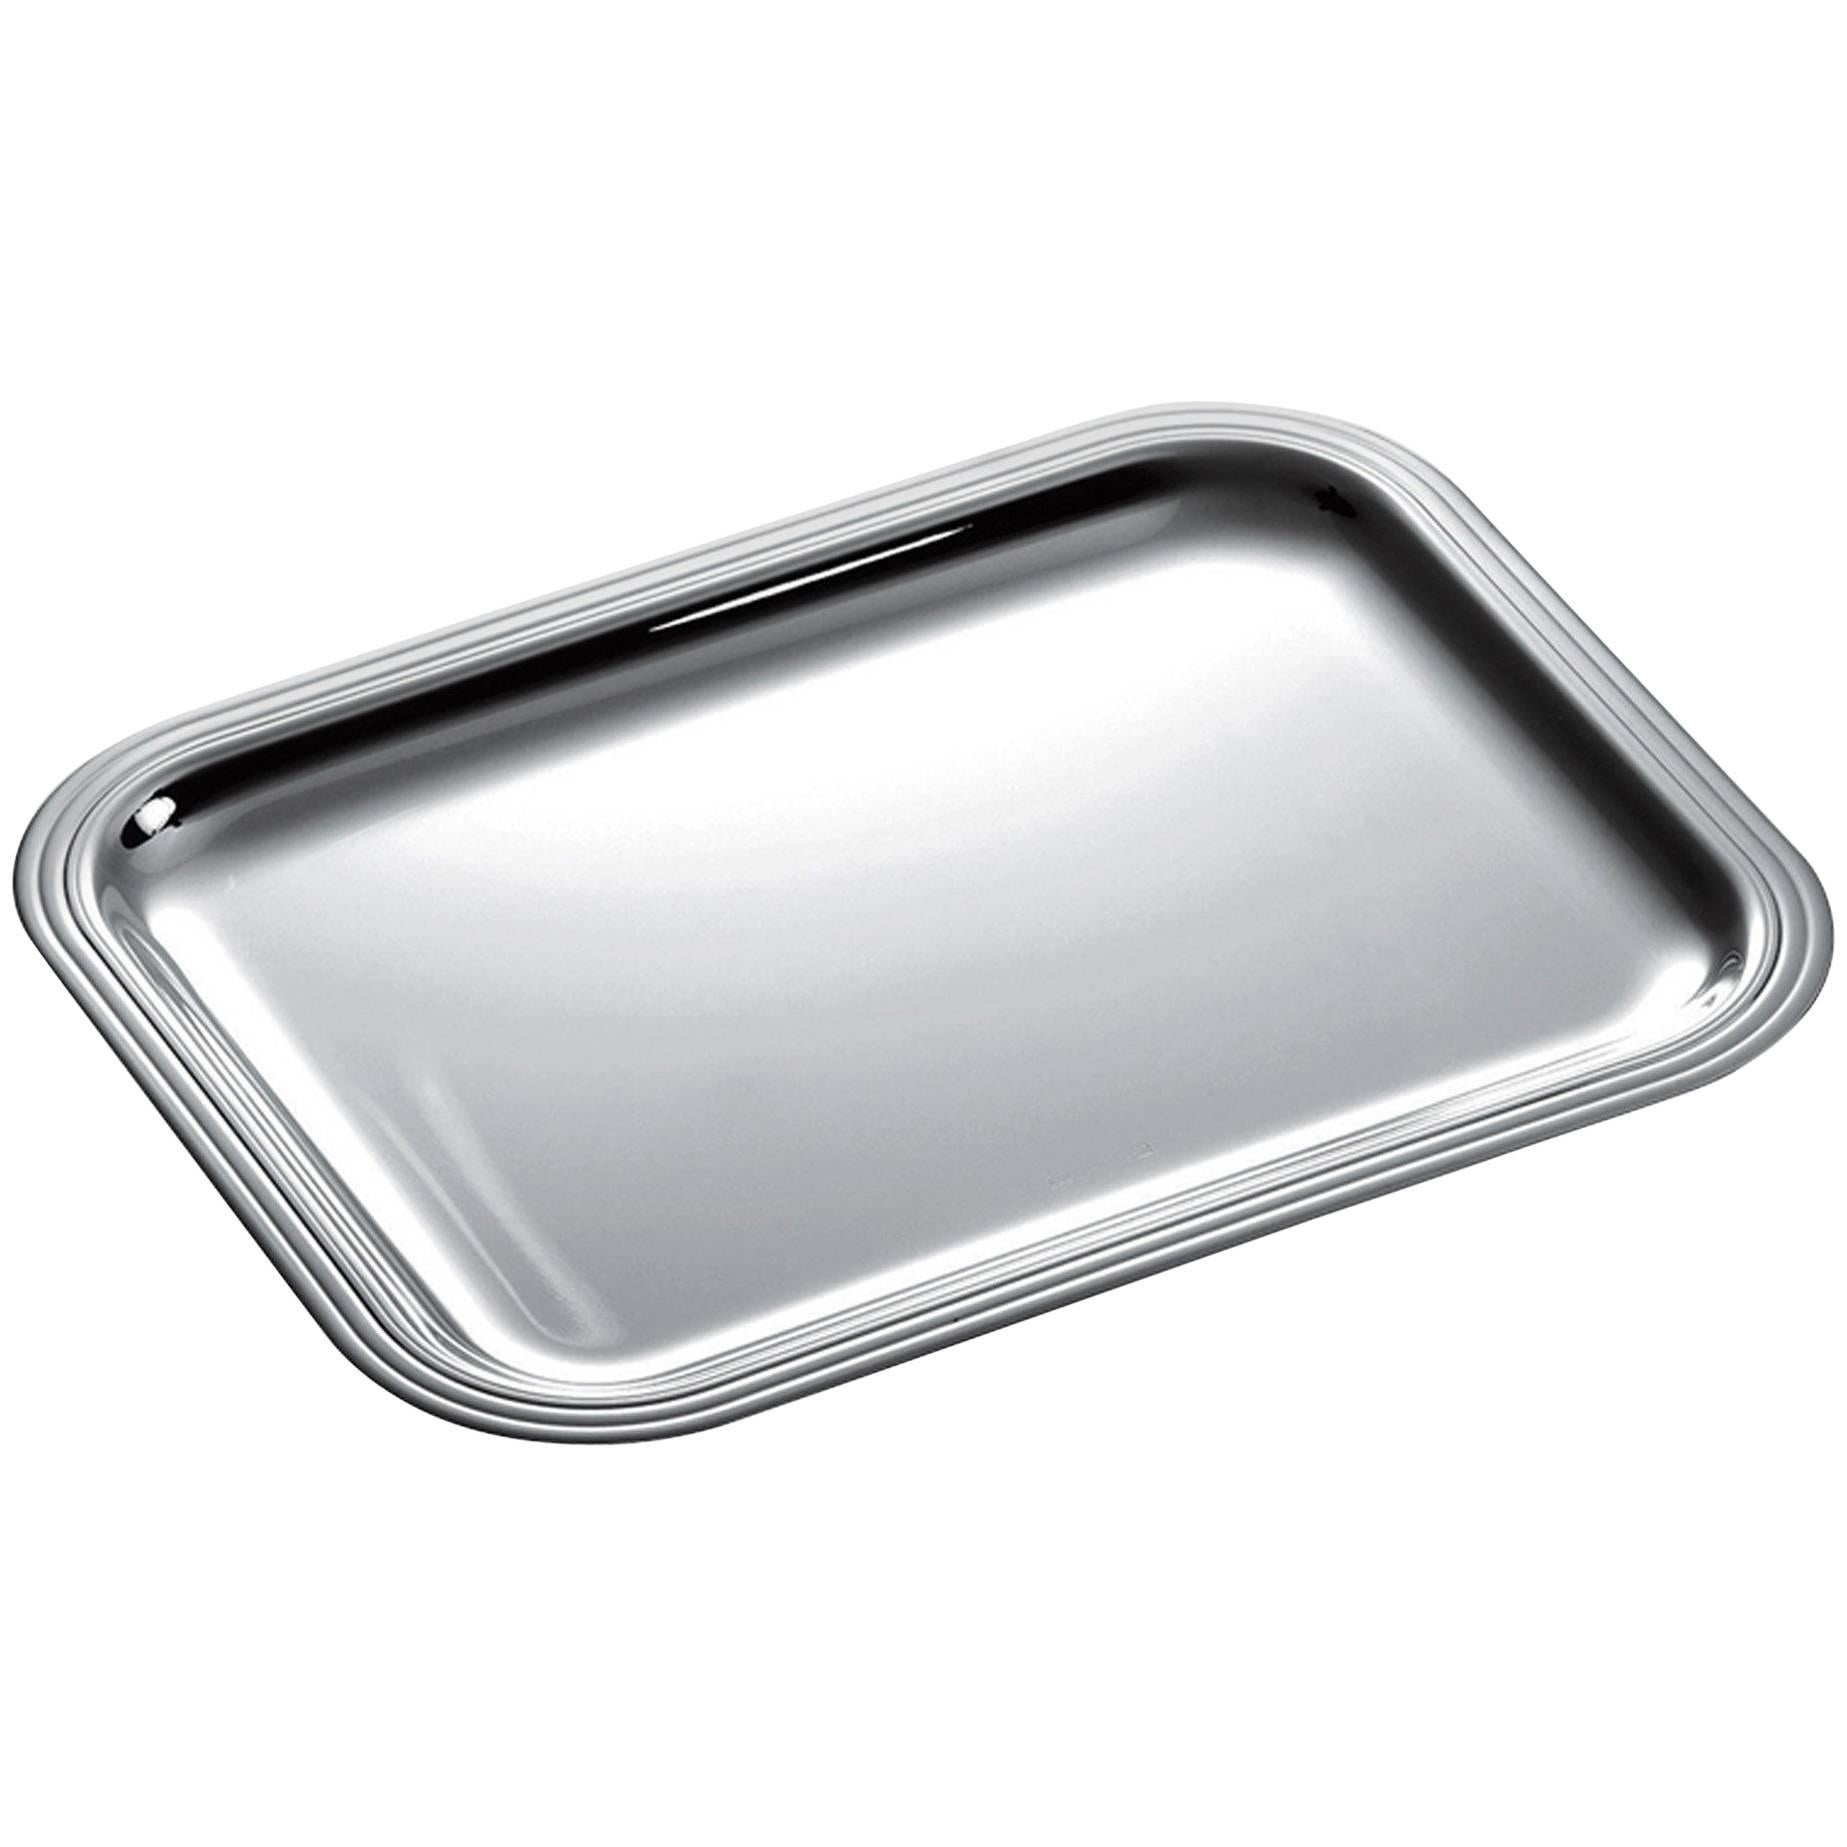 Christofle Silver Plated Rectangular Tray, Model Albi Bagatelle, in It's Box